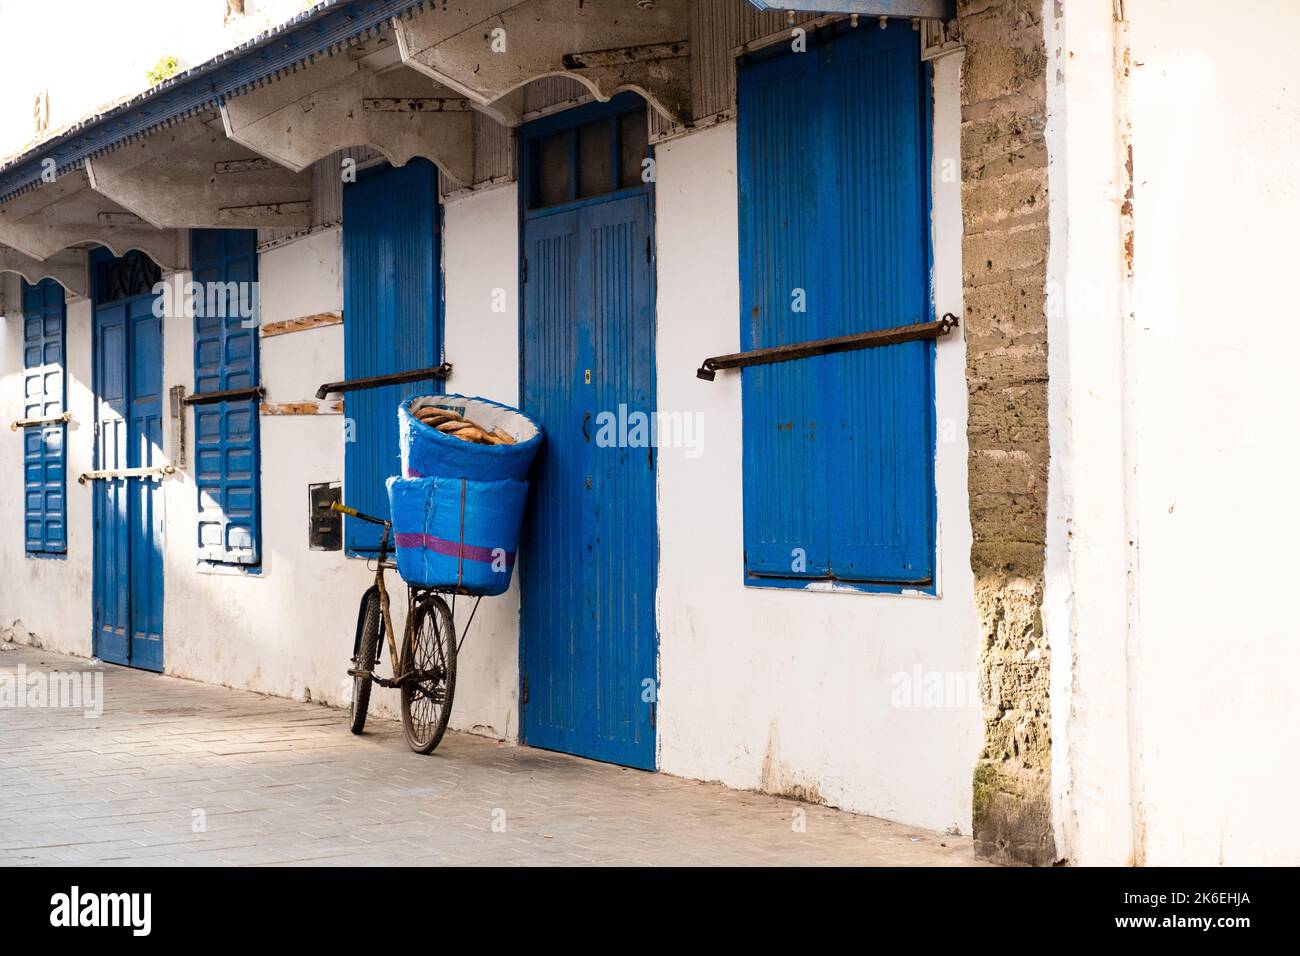 Old bicycle leaning against a white & indigo blue building carrying baskets filled with Khobz, the Moroccan round bread typically eaten with tagine Stock Photo